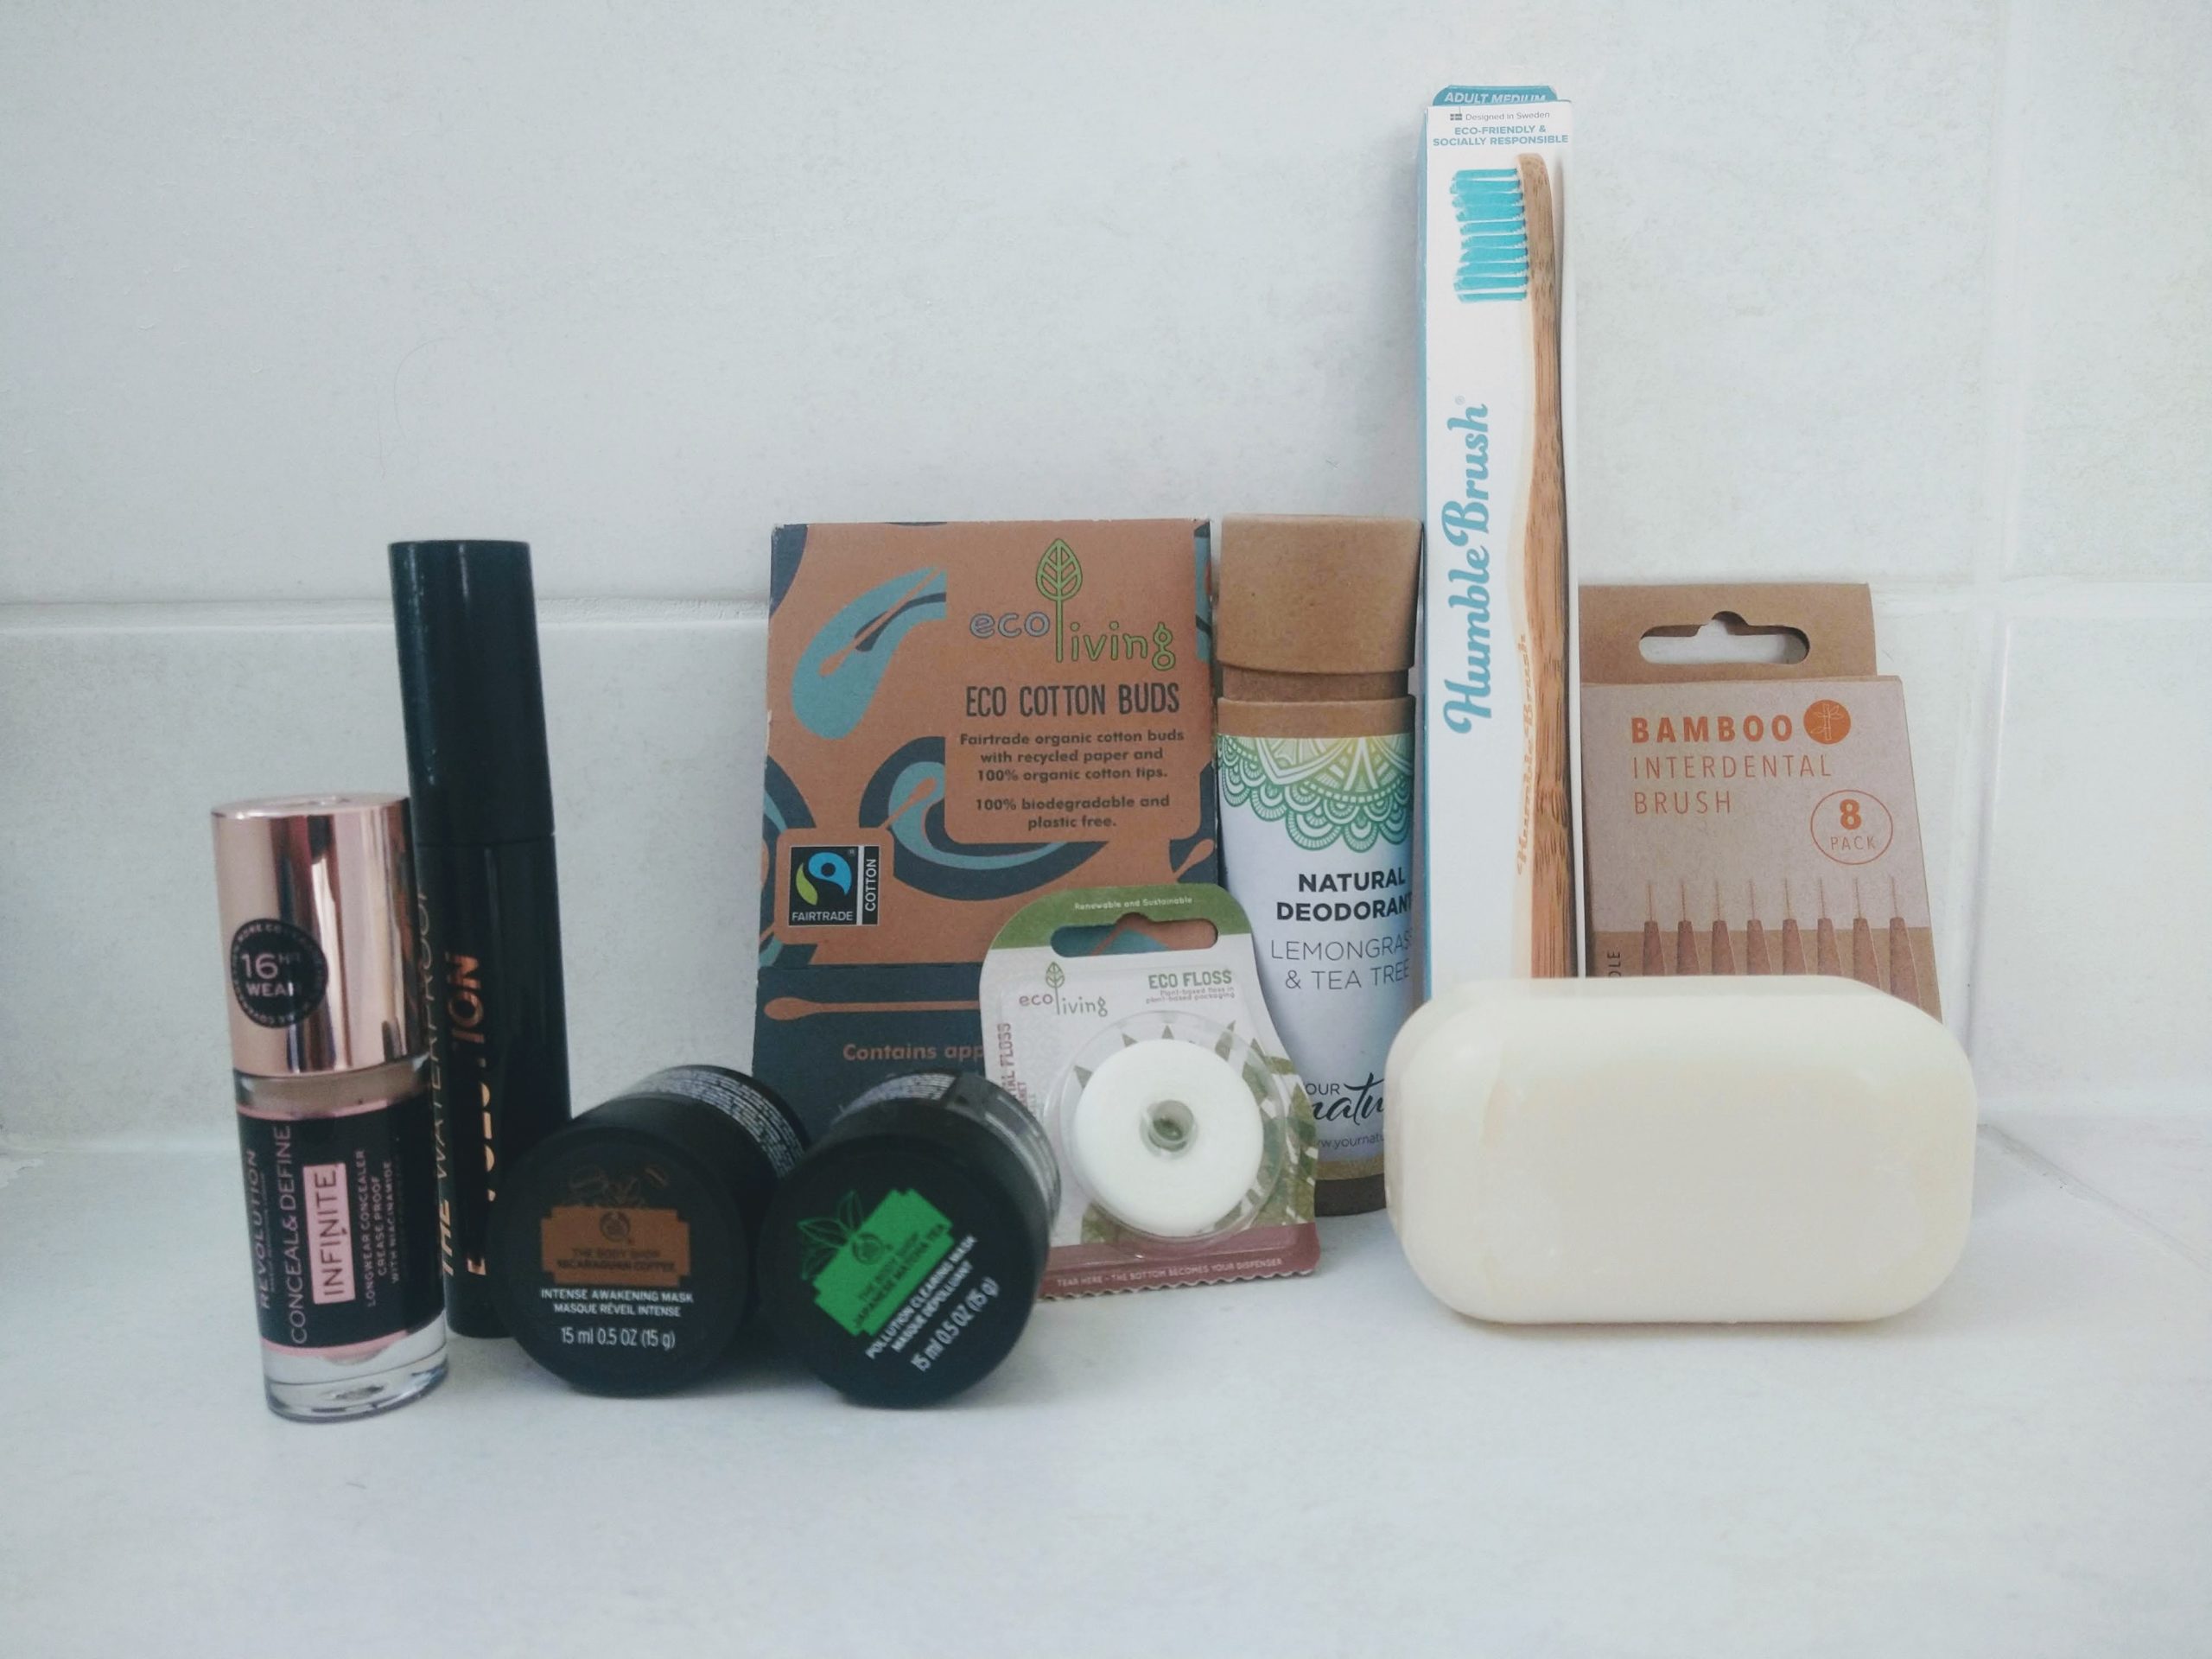 A white tiled background shows sustainable alternative beauty and health care products. Revolution make up, body shop face masks, plastic free cotton buds and dental floss, a bamboo toothbrush and a bar of soap.